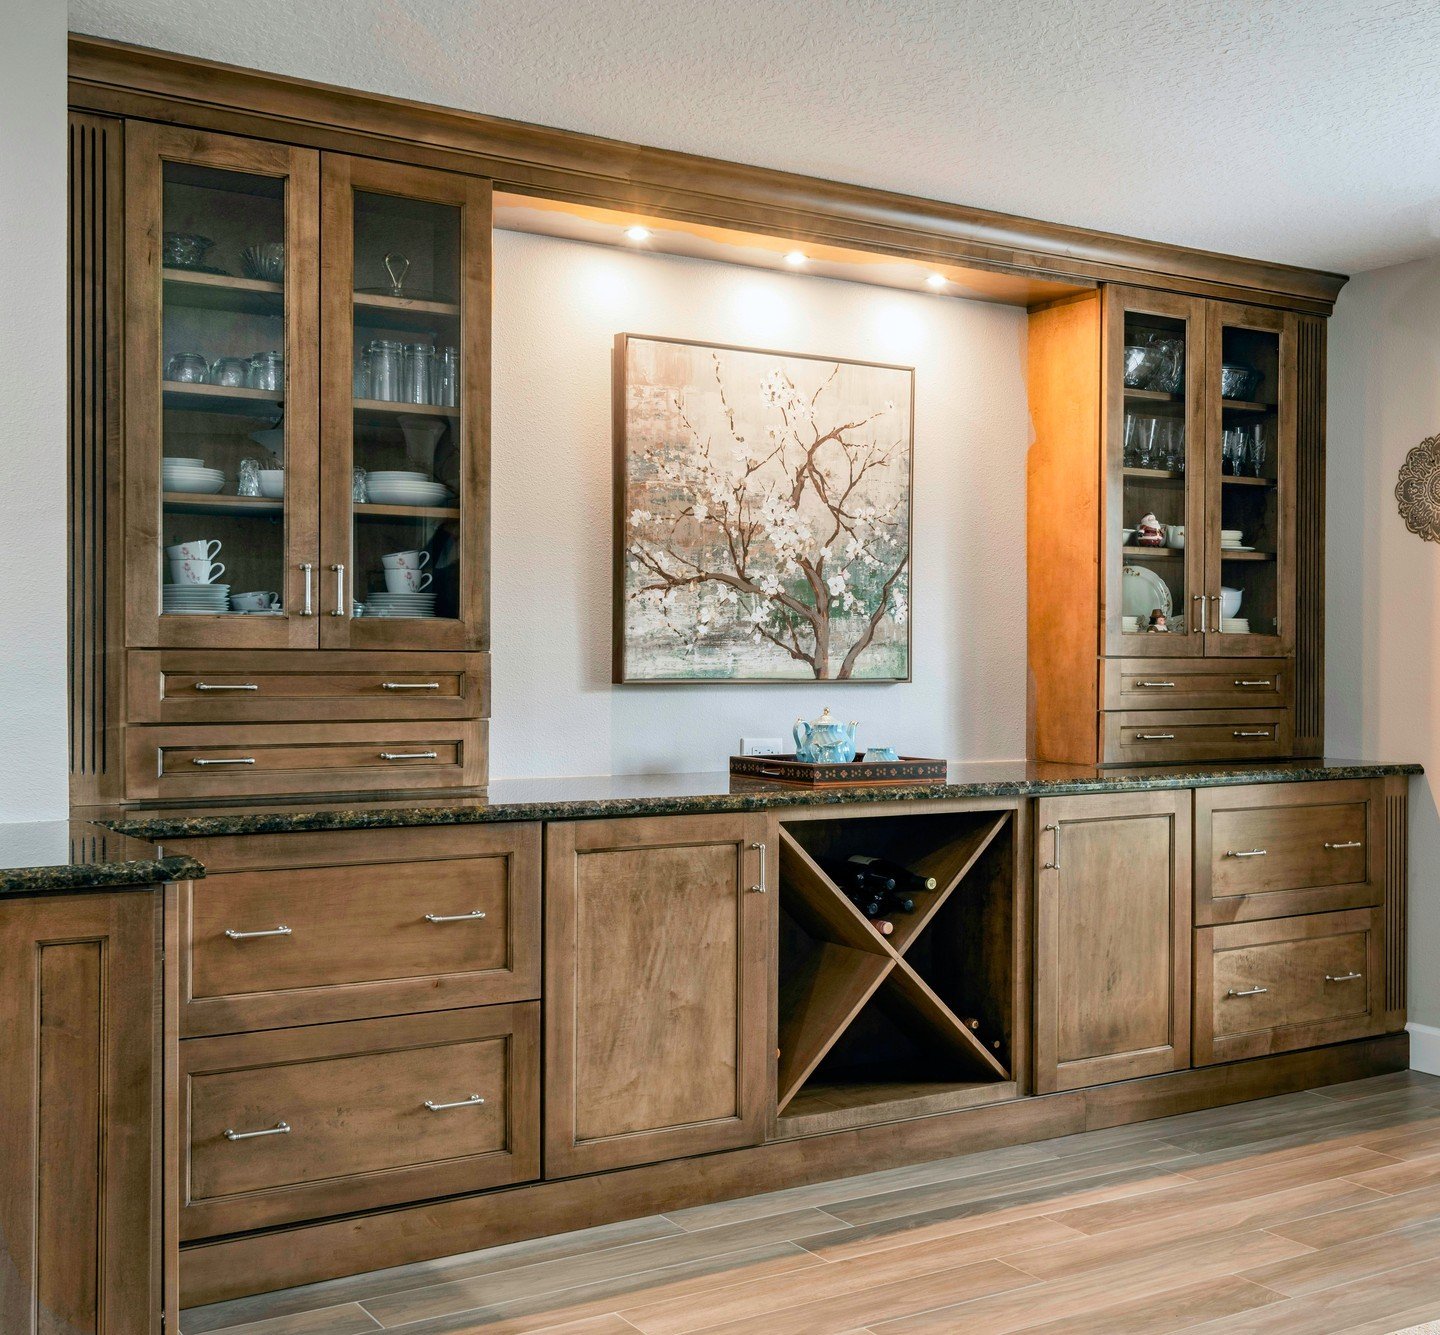 Looking for dining room storage inspiration? Look no further! This remodel is packed with smart solutions for keeping your space organized. ✨ 

#TheHomestylesGroup #DiningRoomStorage #KitchenStorage #HomeStyling